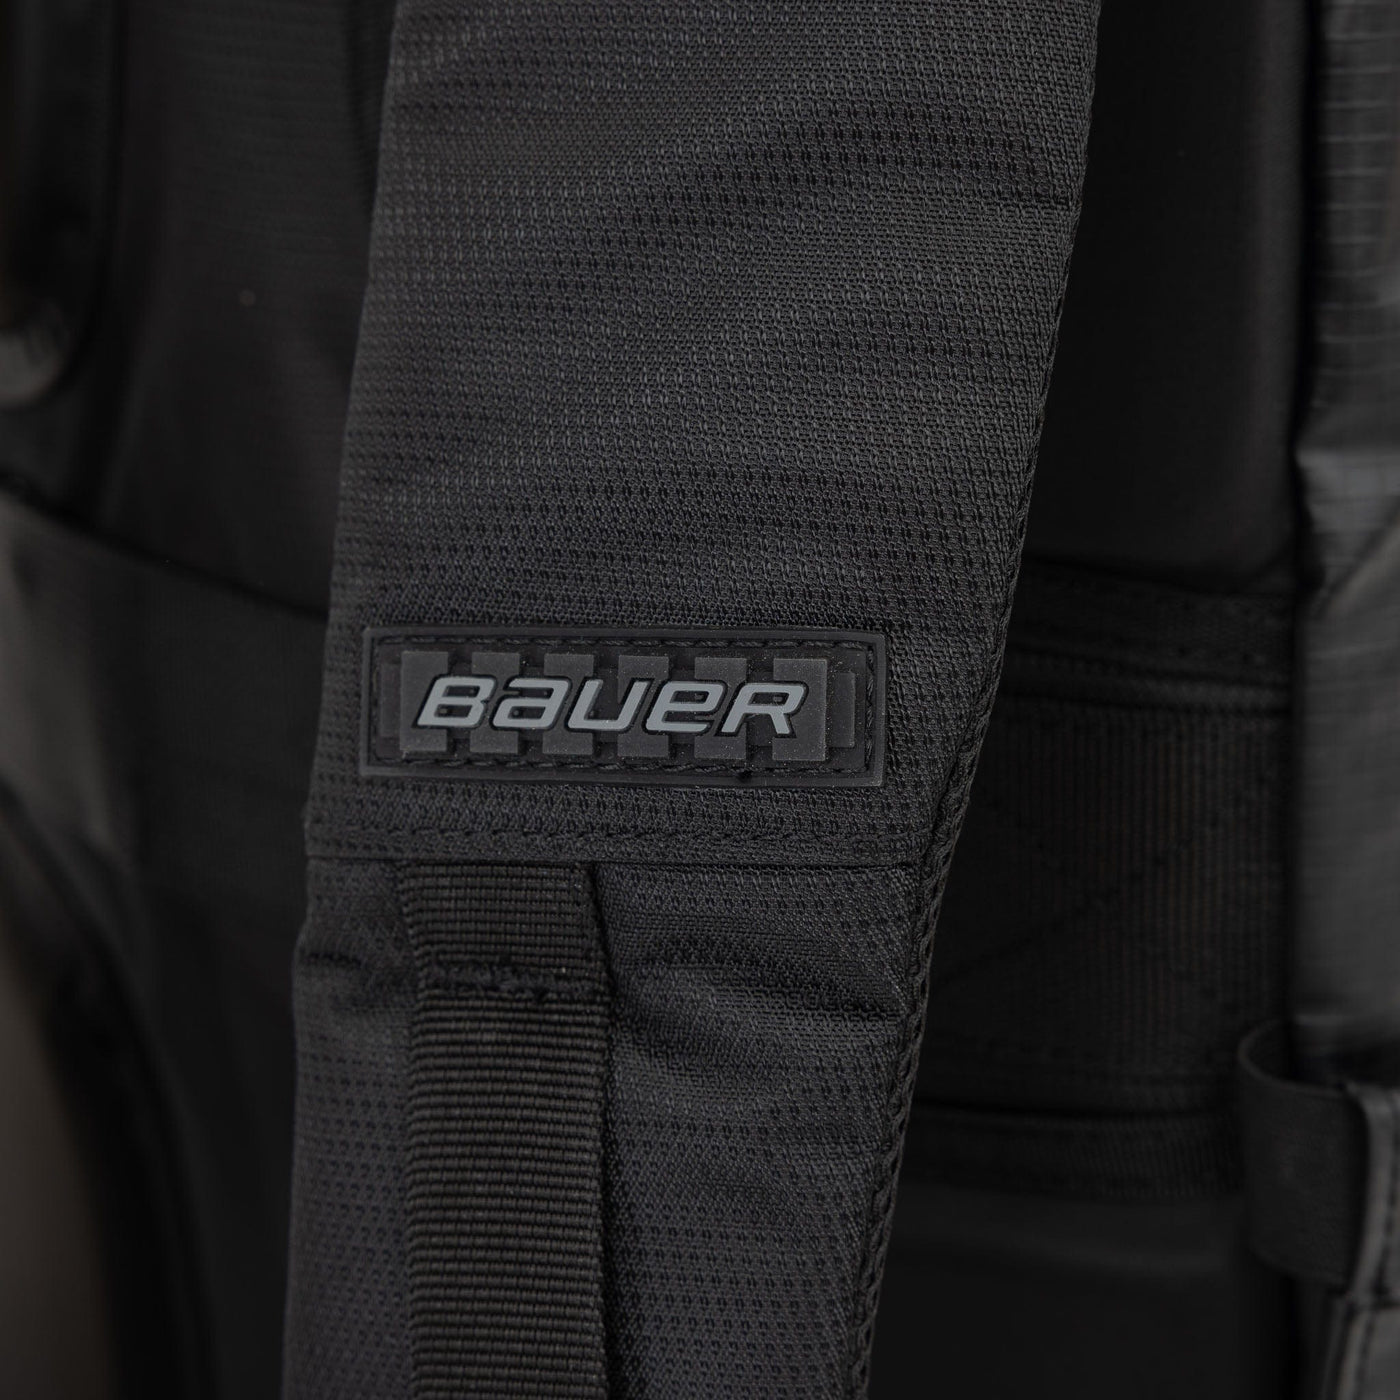 Bauer Tactical Backpack - The Hockey Shop Source For Sports